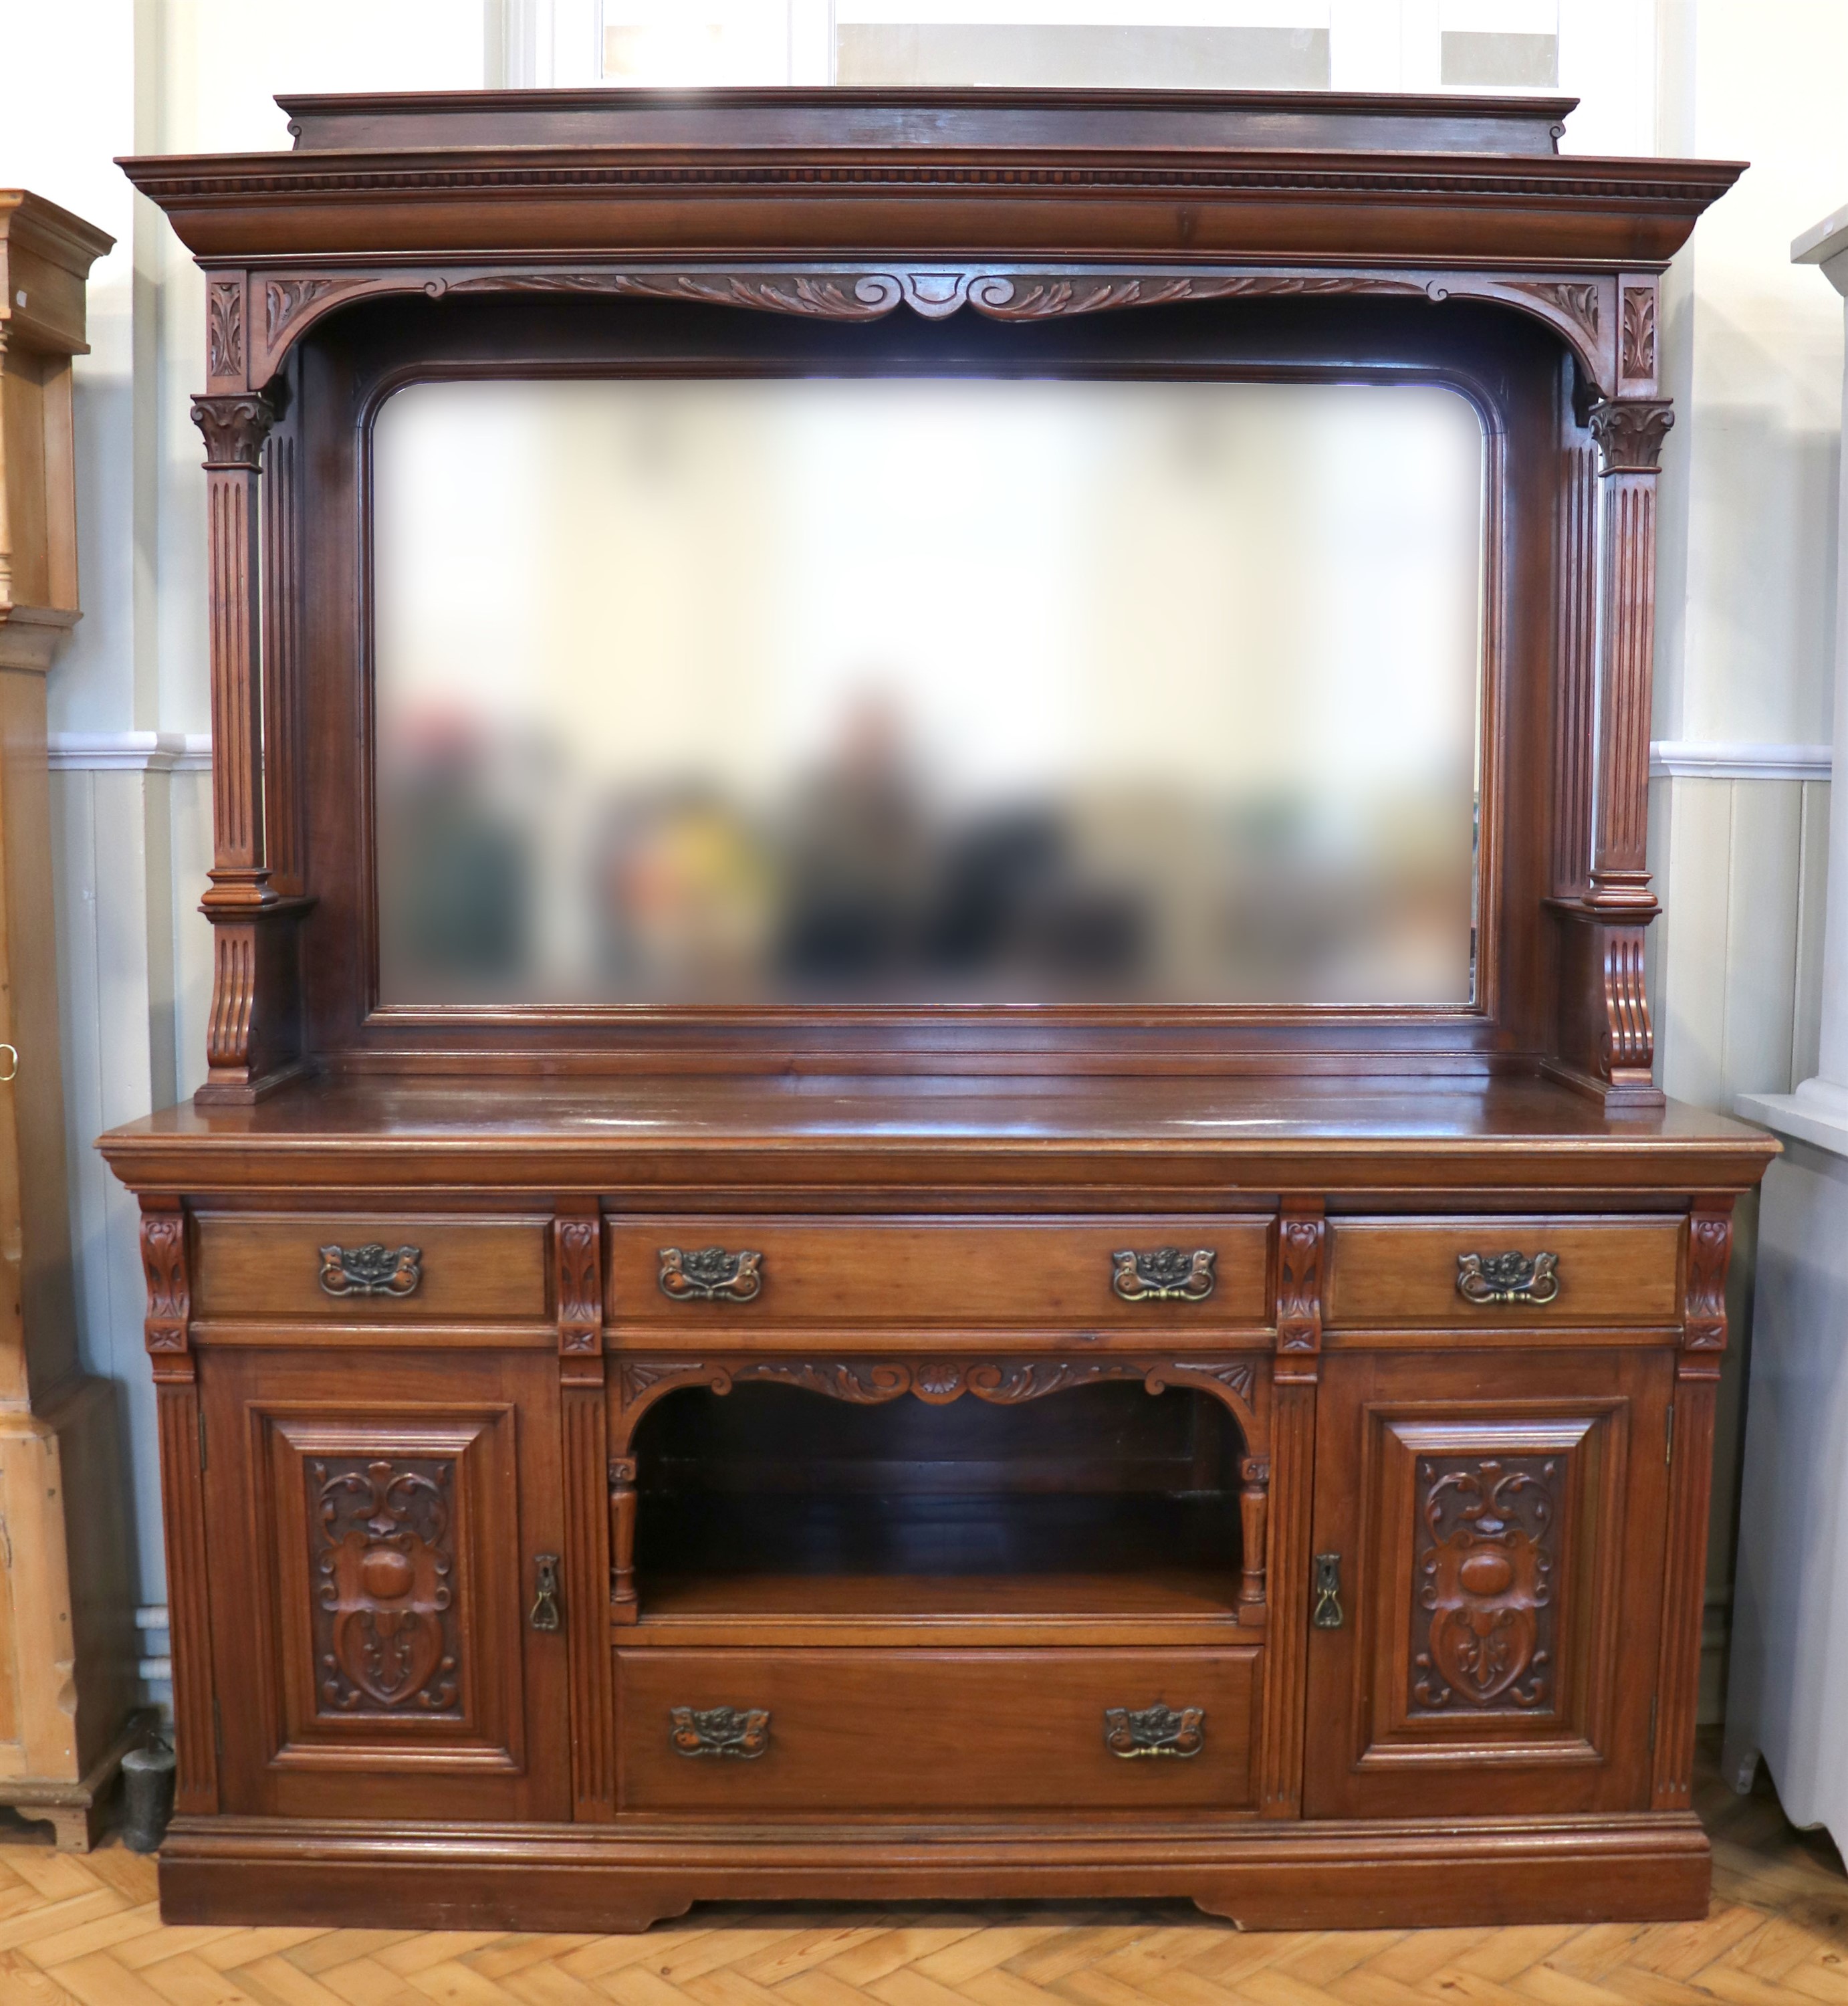 A late 19th / early 20th Century walnut mirror backed sideboard, 184 x 59 x 221 cm